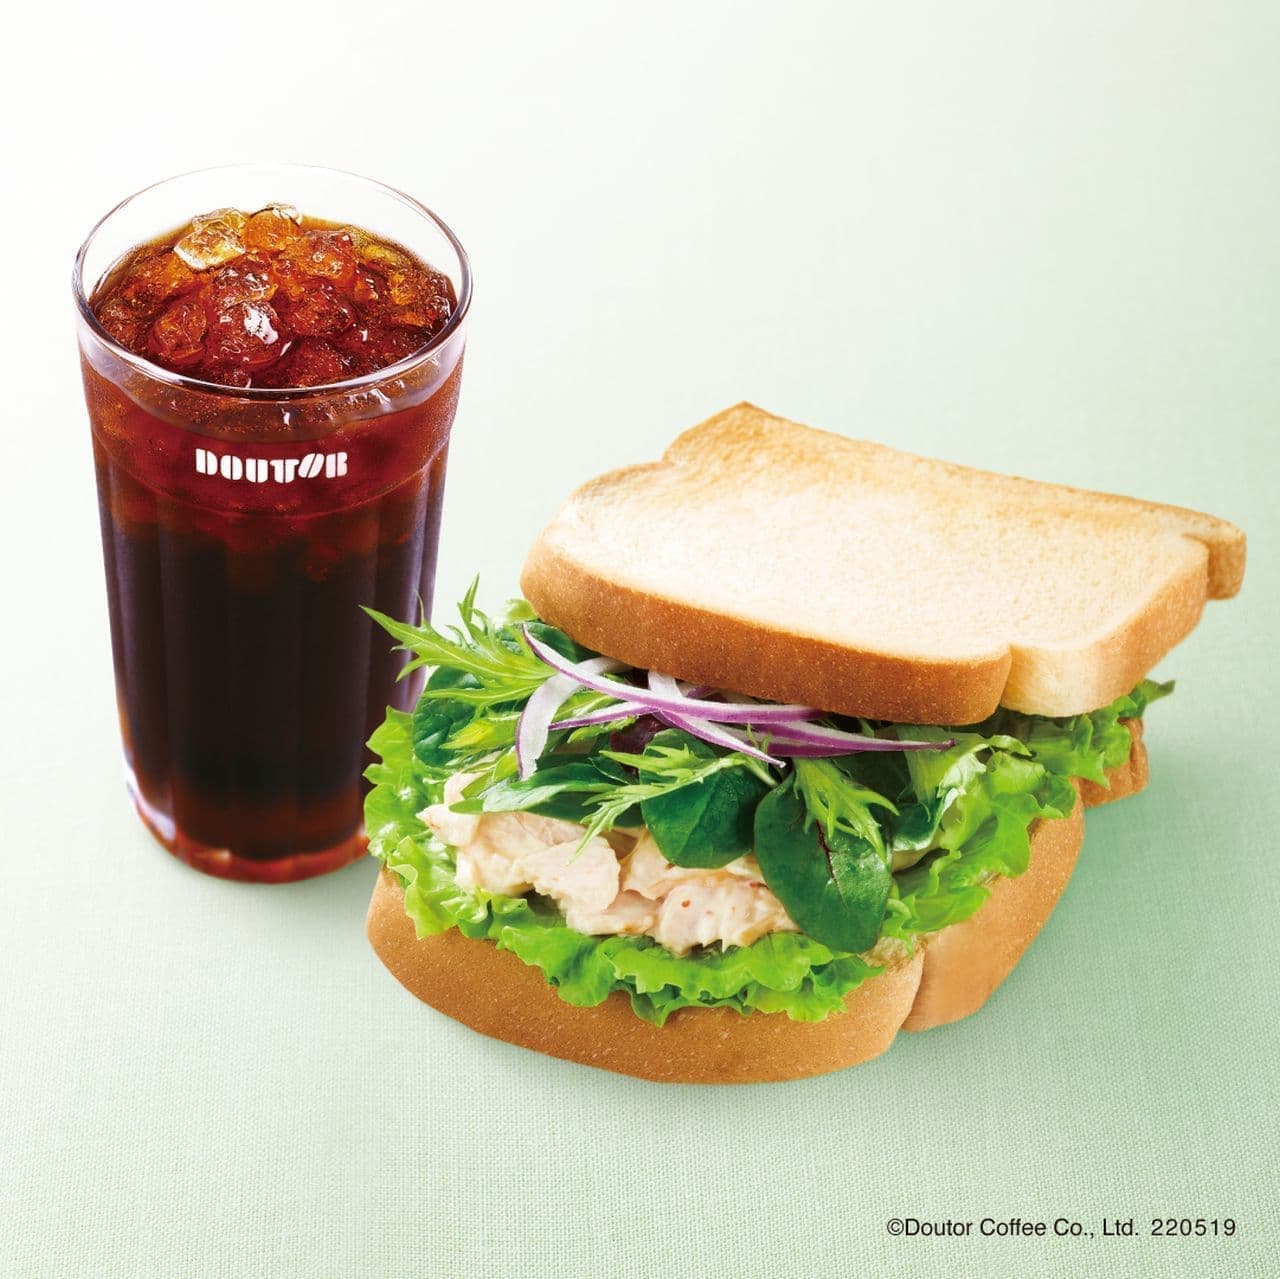 Doutor Coffee Shop "Morning Set B - Smoked Chicken and Vegetables - Japanese Mayo Sauce